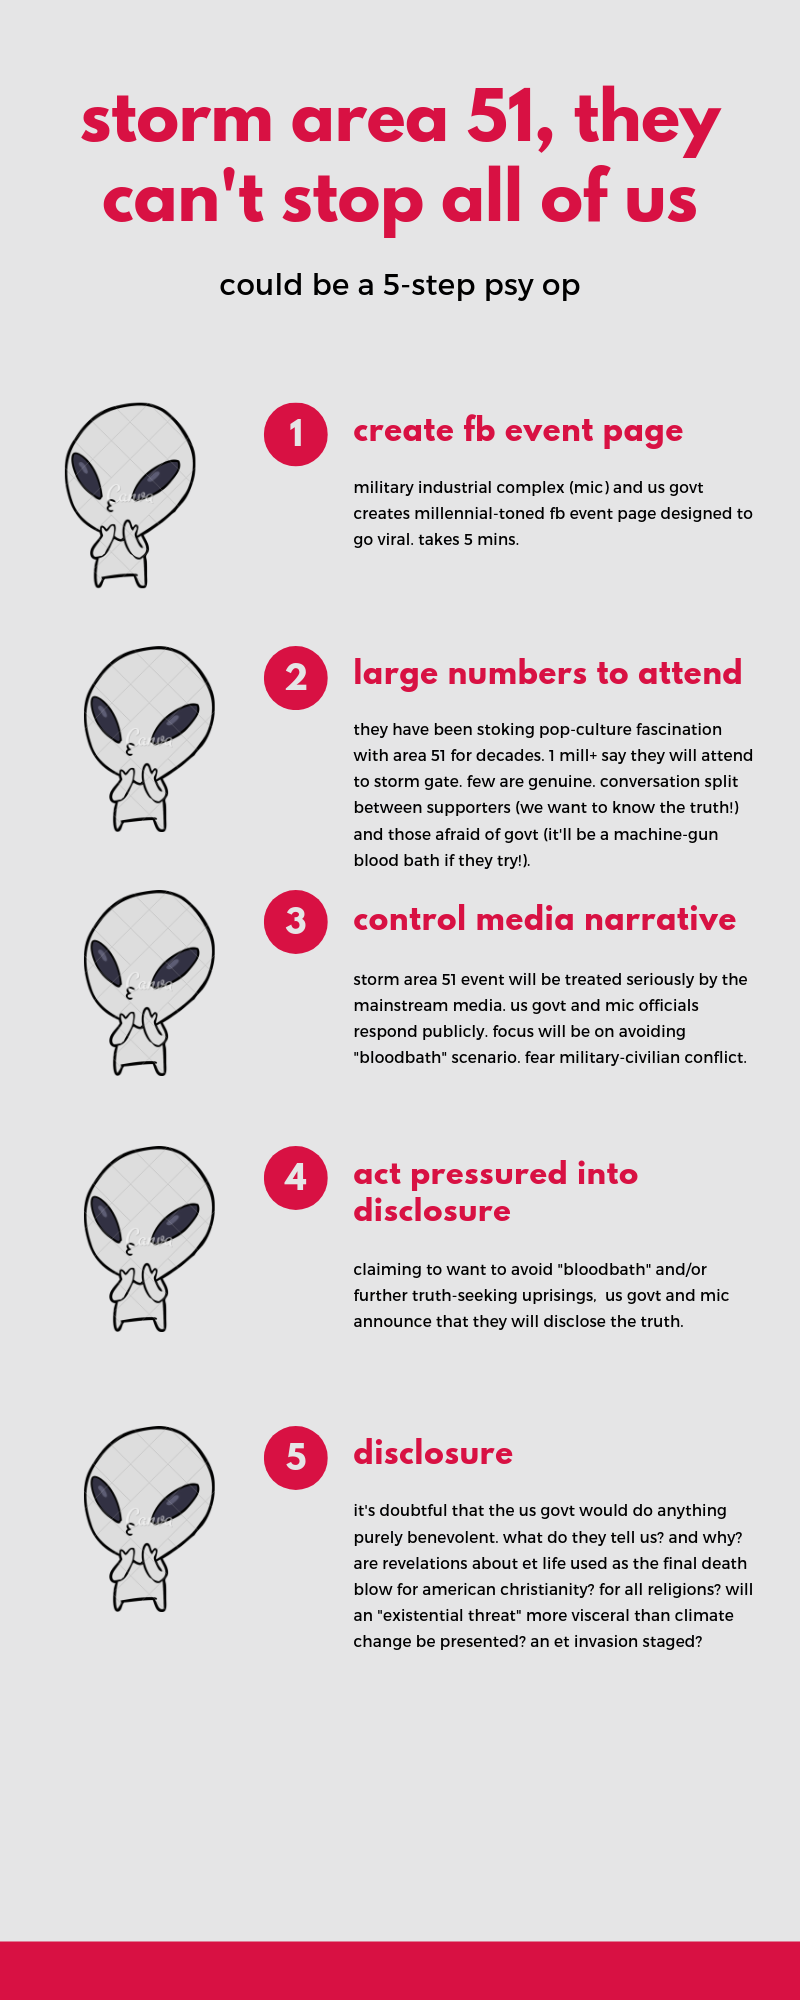 infographic with 5 steps explaining how the storm area 51, they can't stop all of us facebook event is a government orchestrated psychological operation. it could lead to alien disclosure about extraterrestrial life.